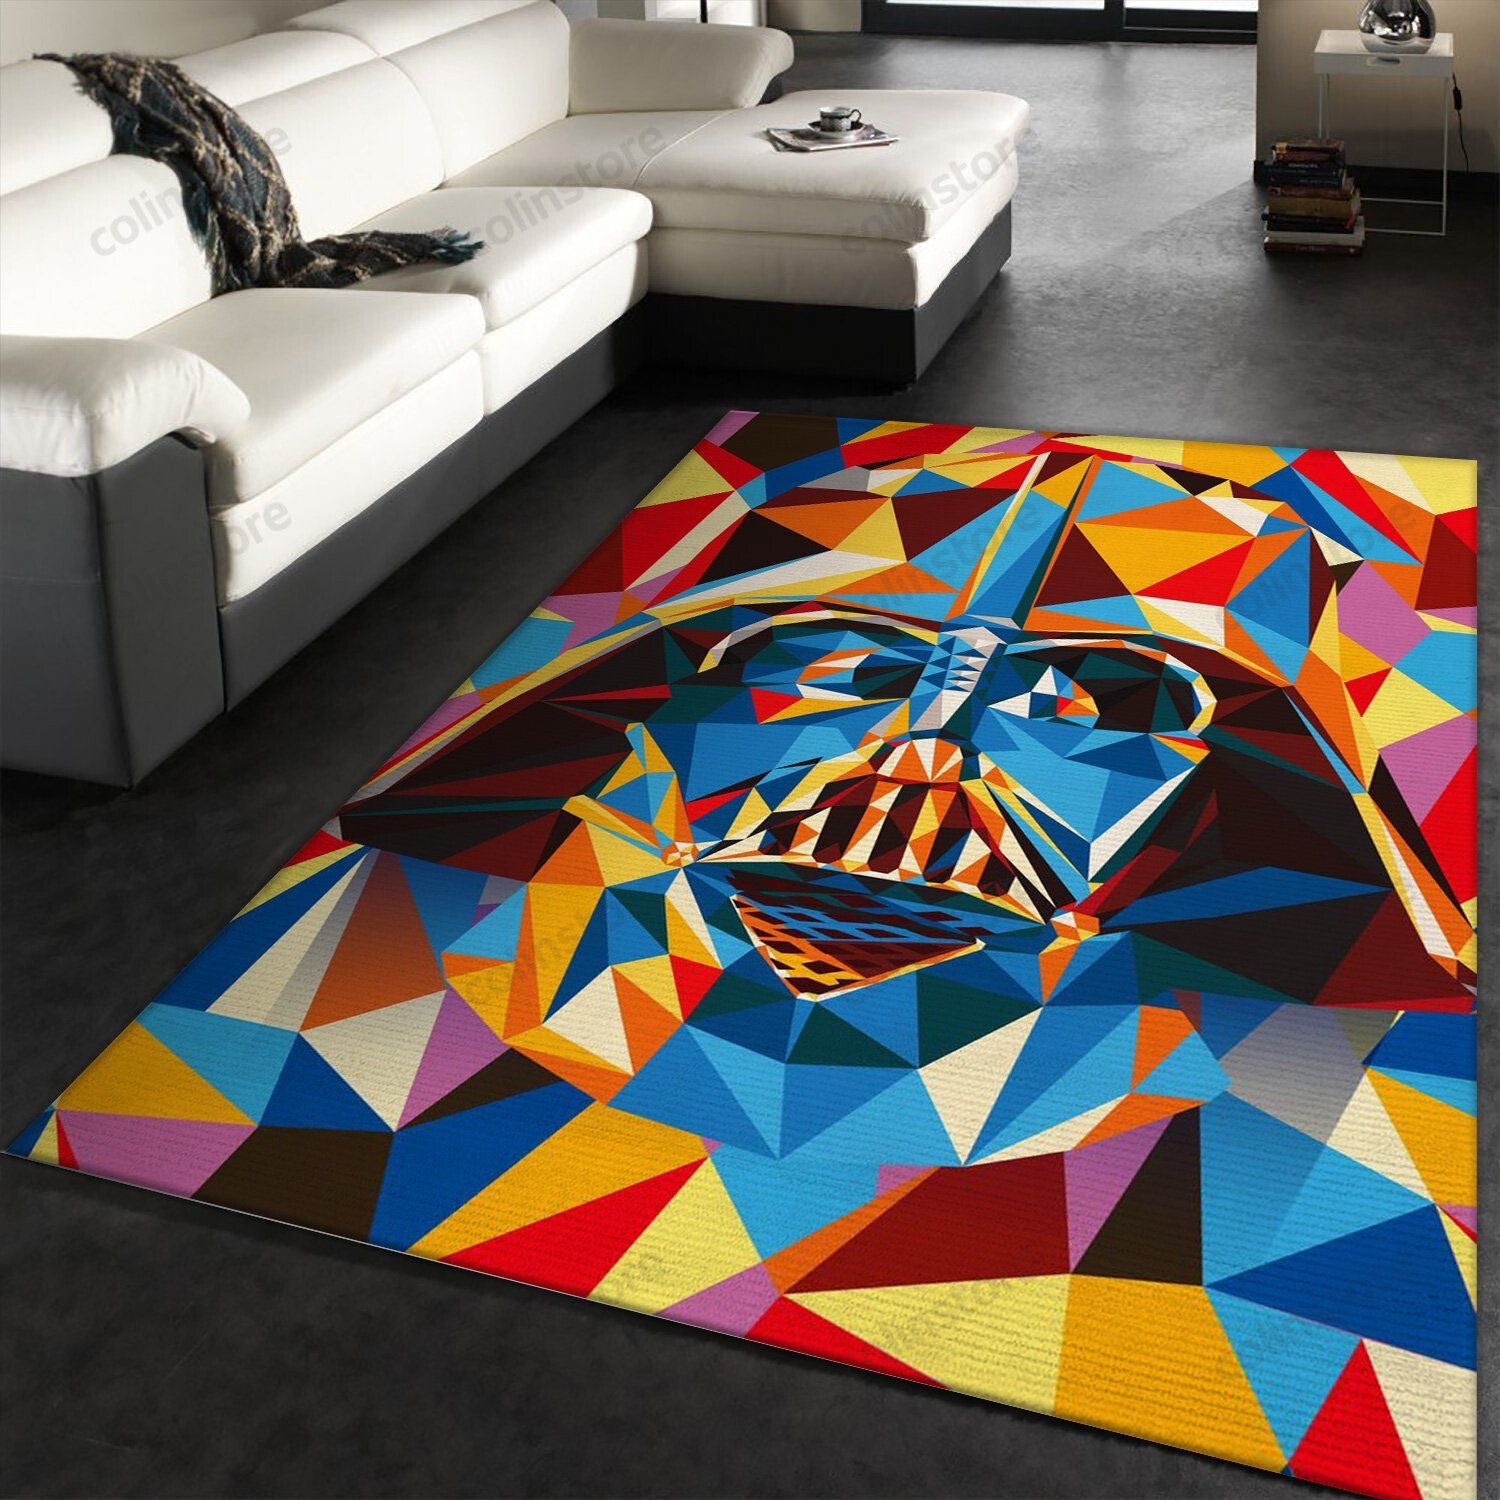 Vader Abstract Star Wars Area Area Rug Carpet